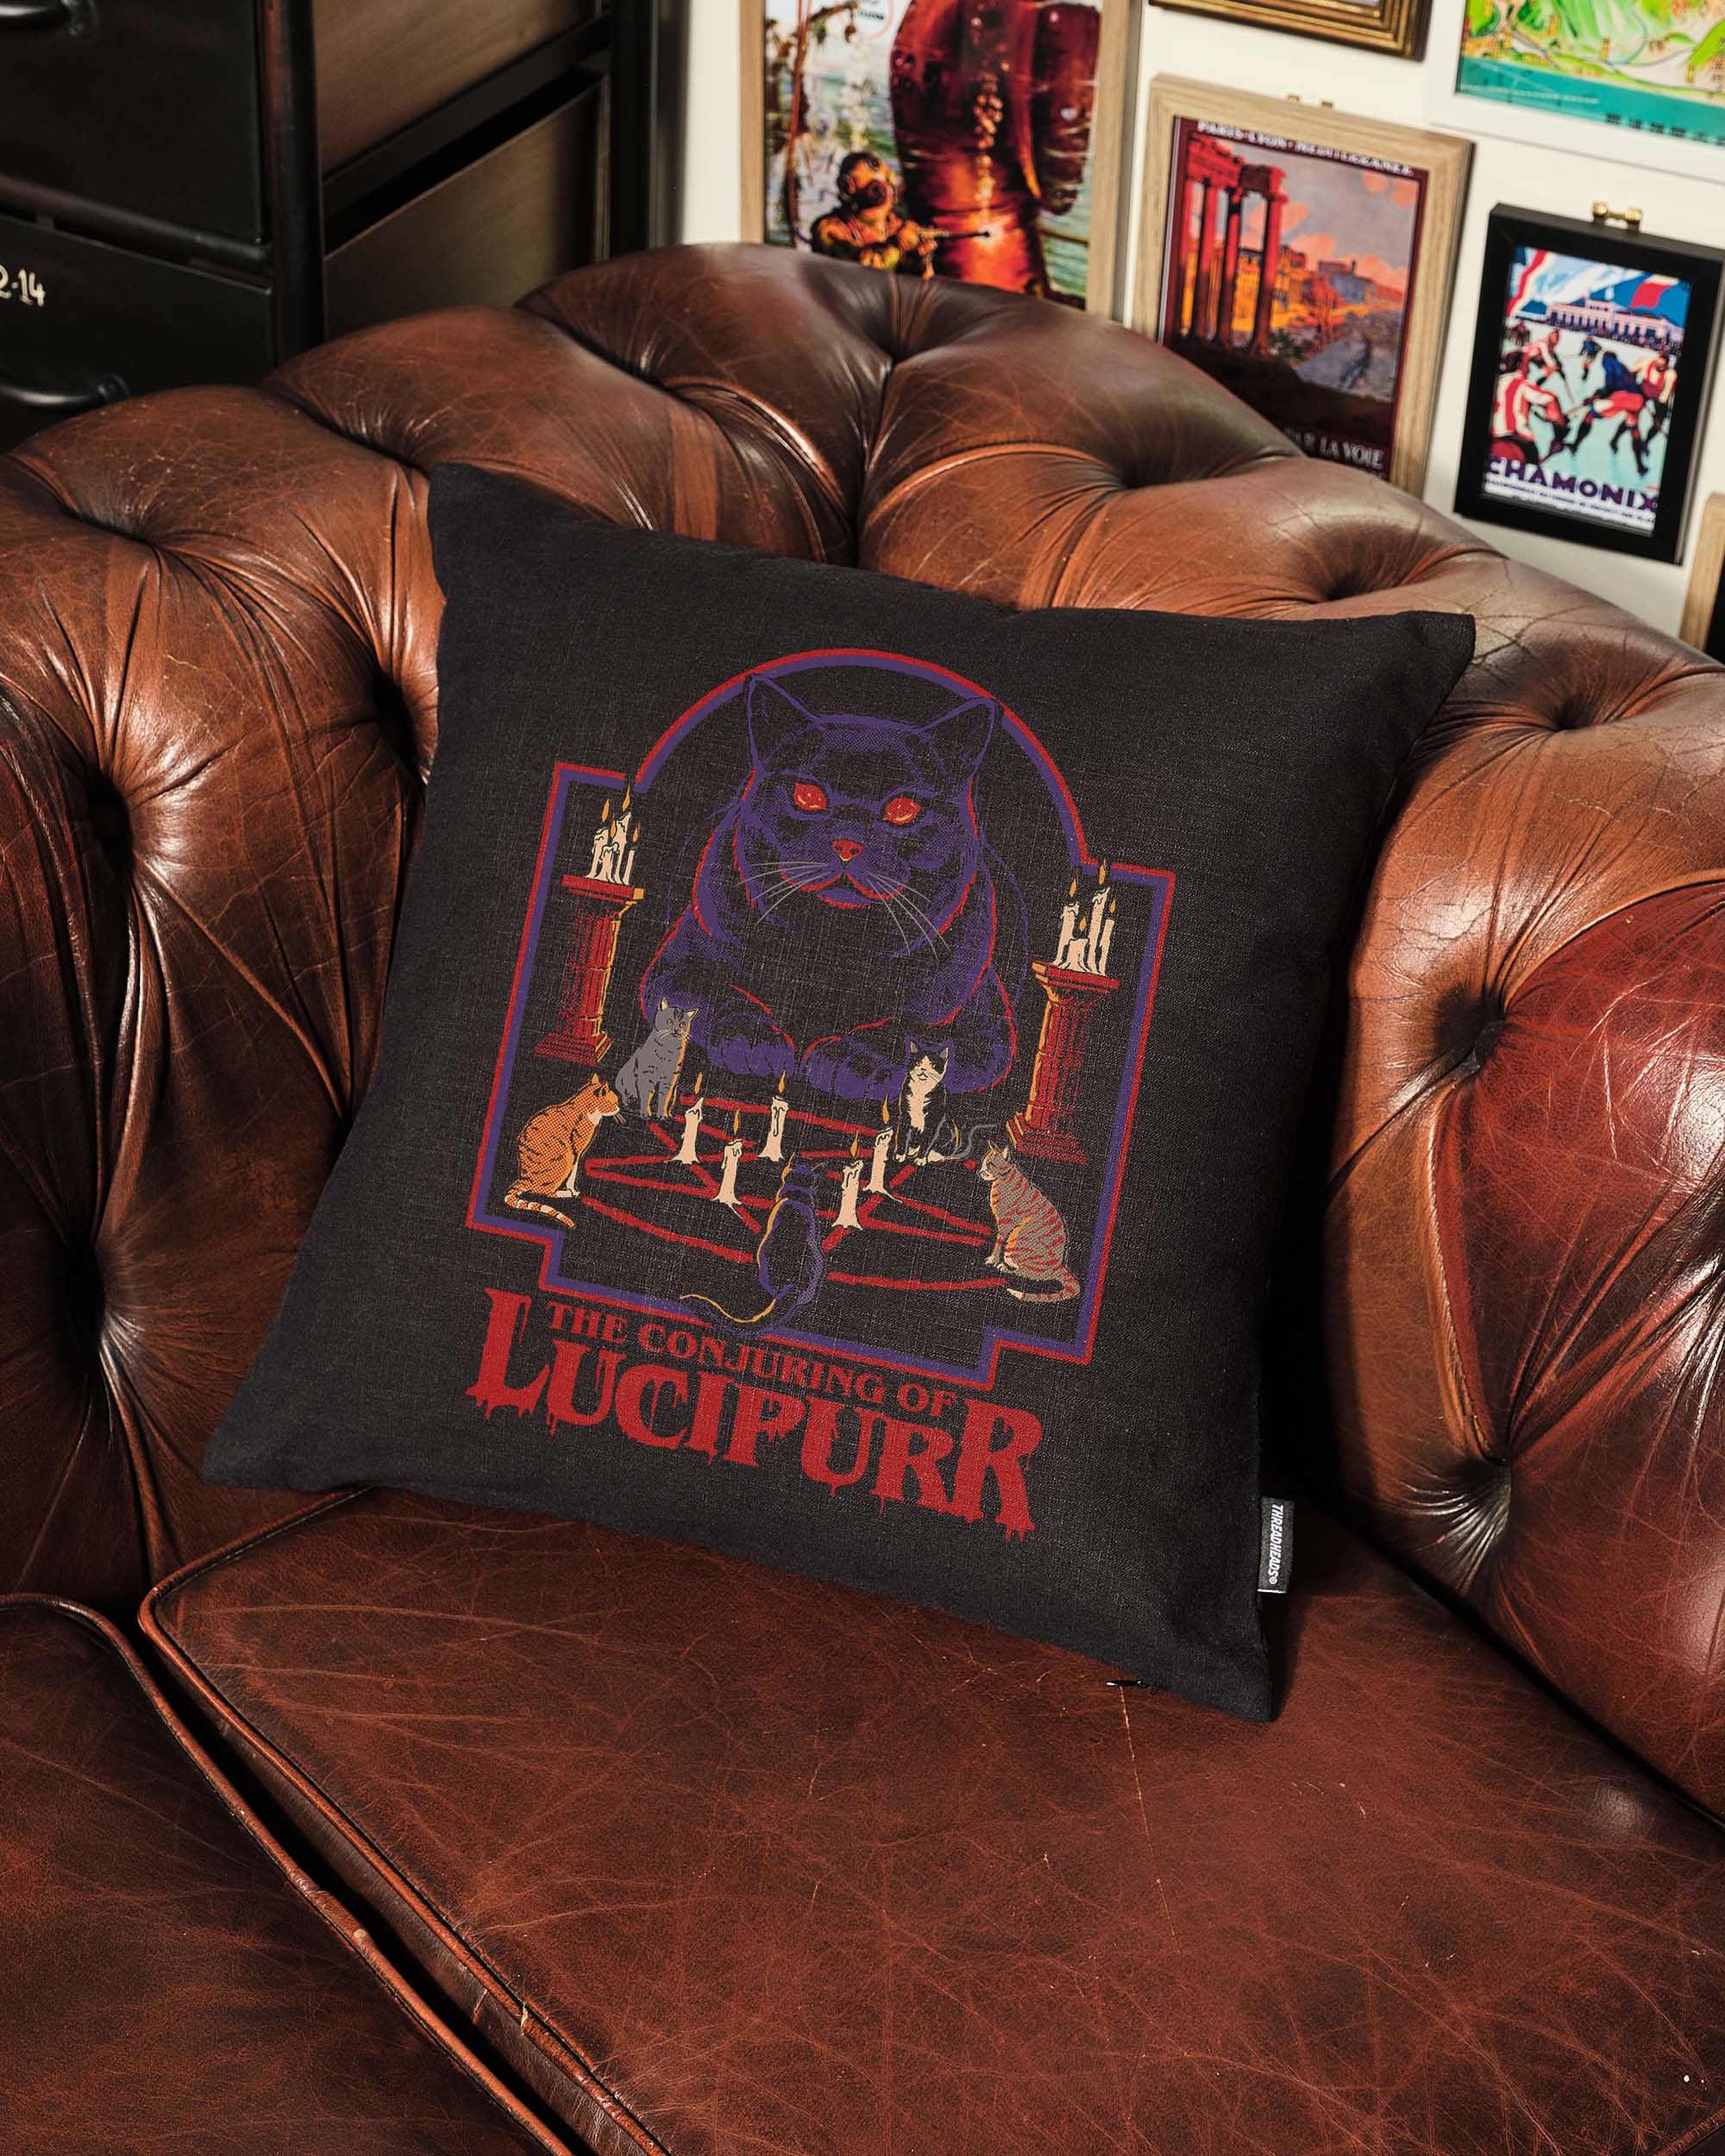 The Conjuring of Lucipurr Cushion